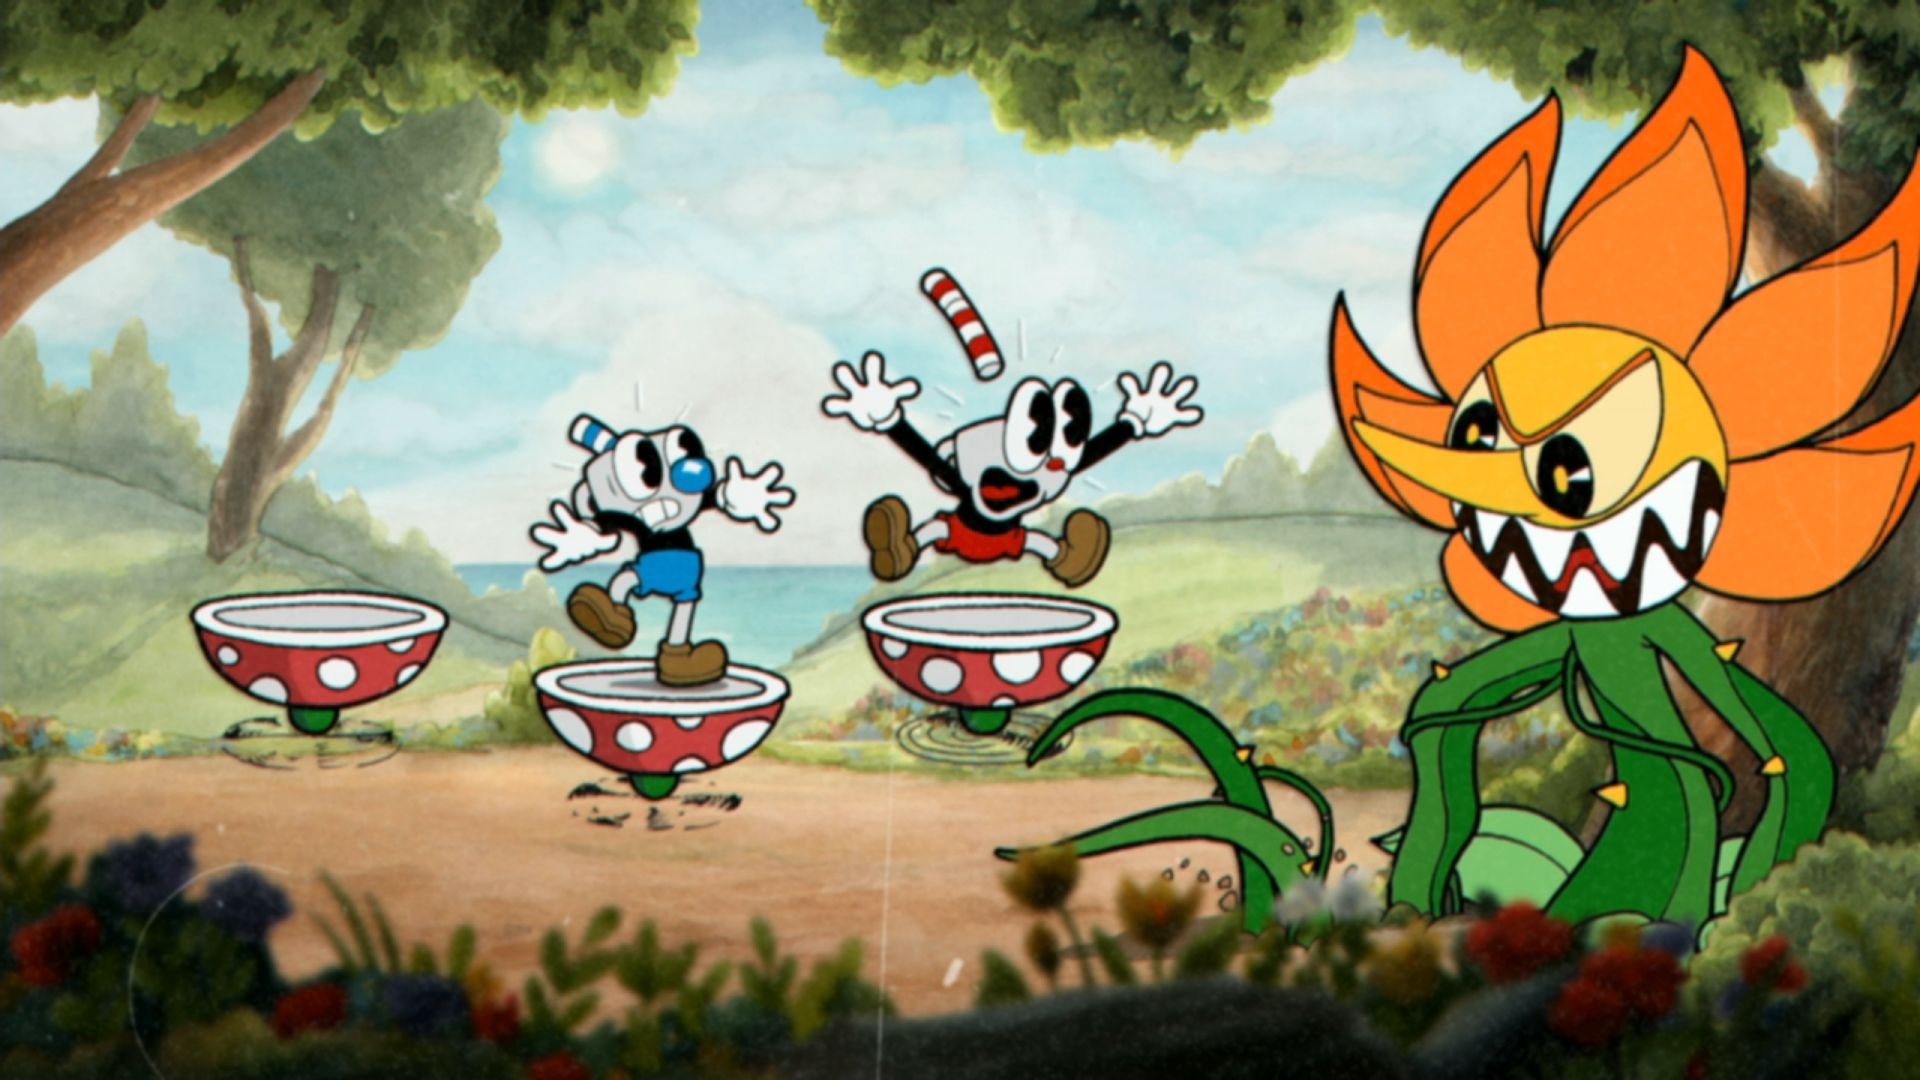 Cuphead is coming to Netflix as an animated comedy series